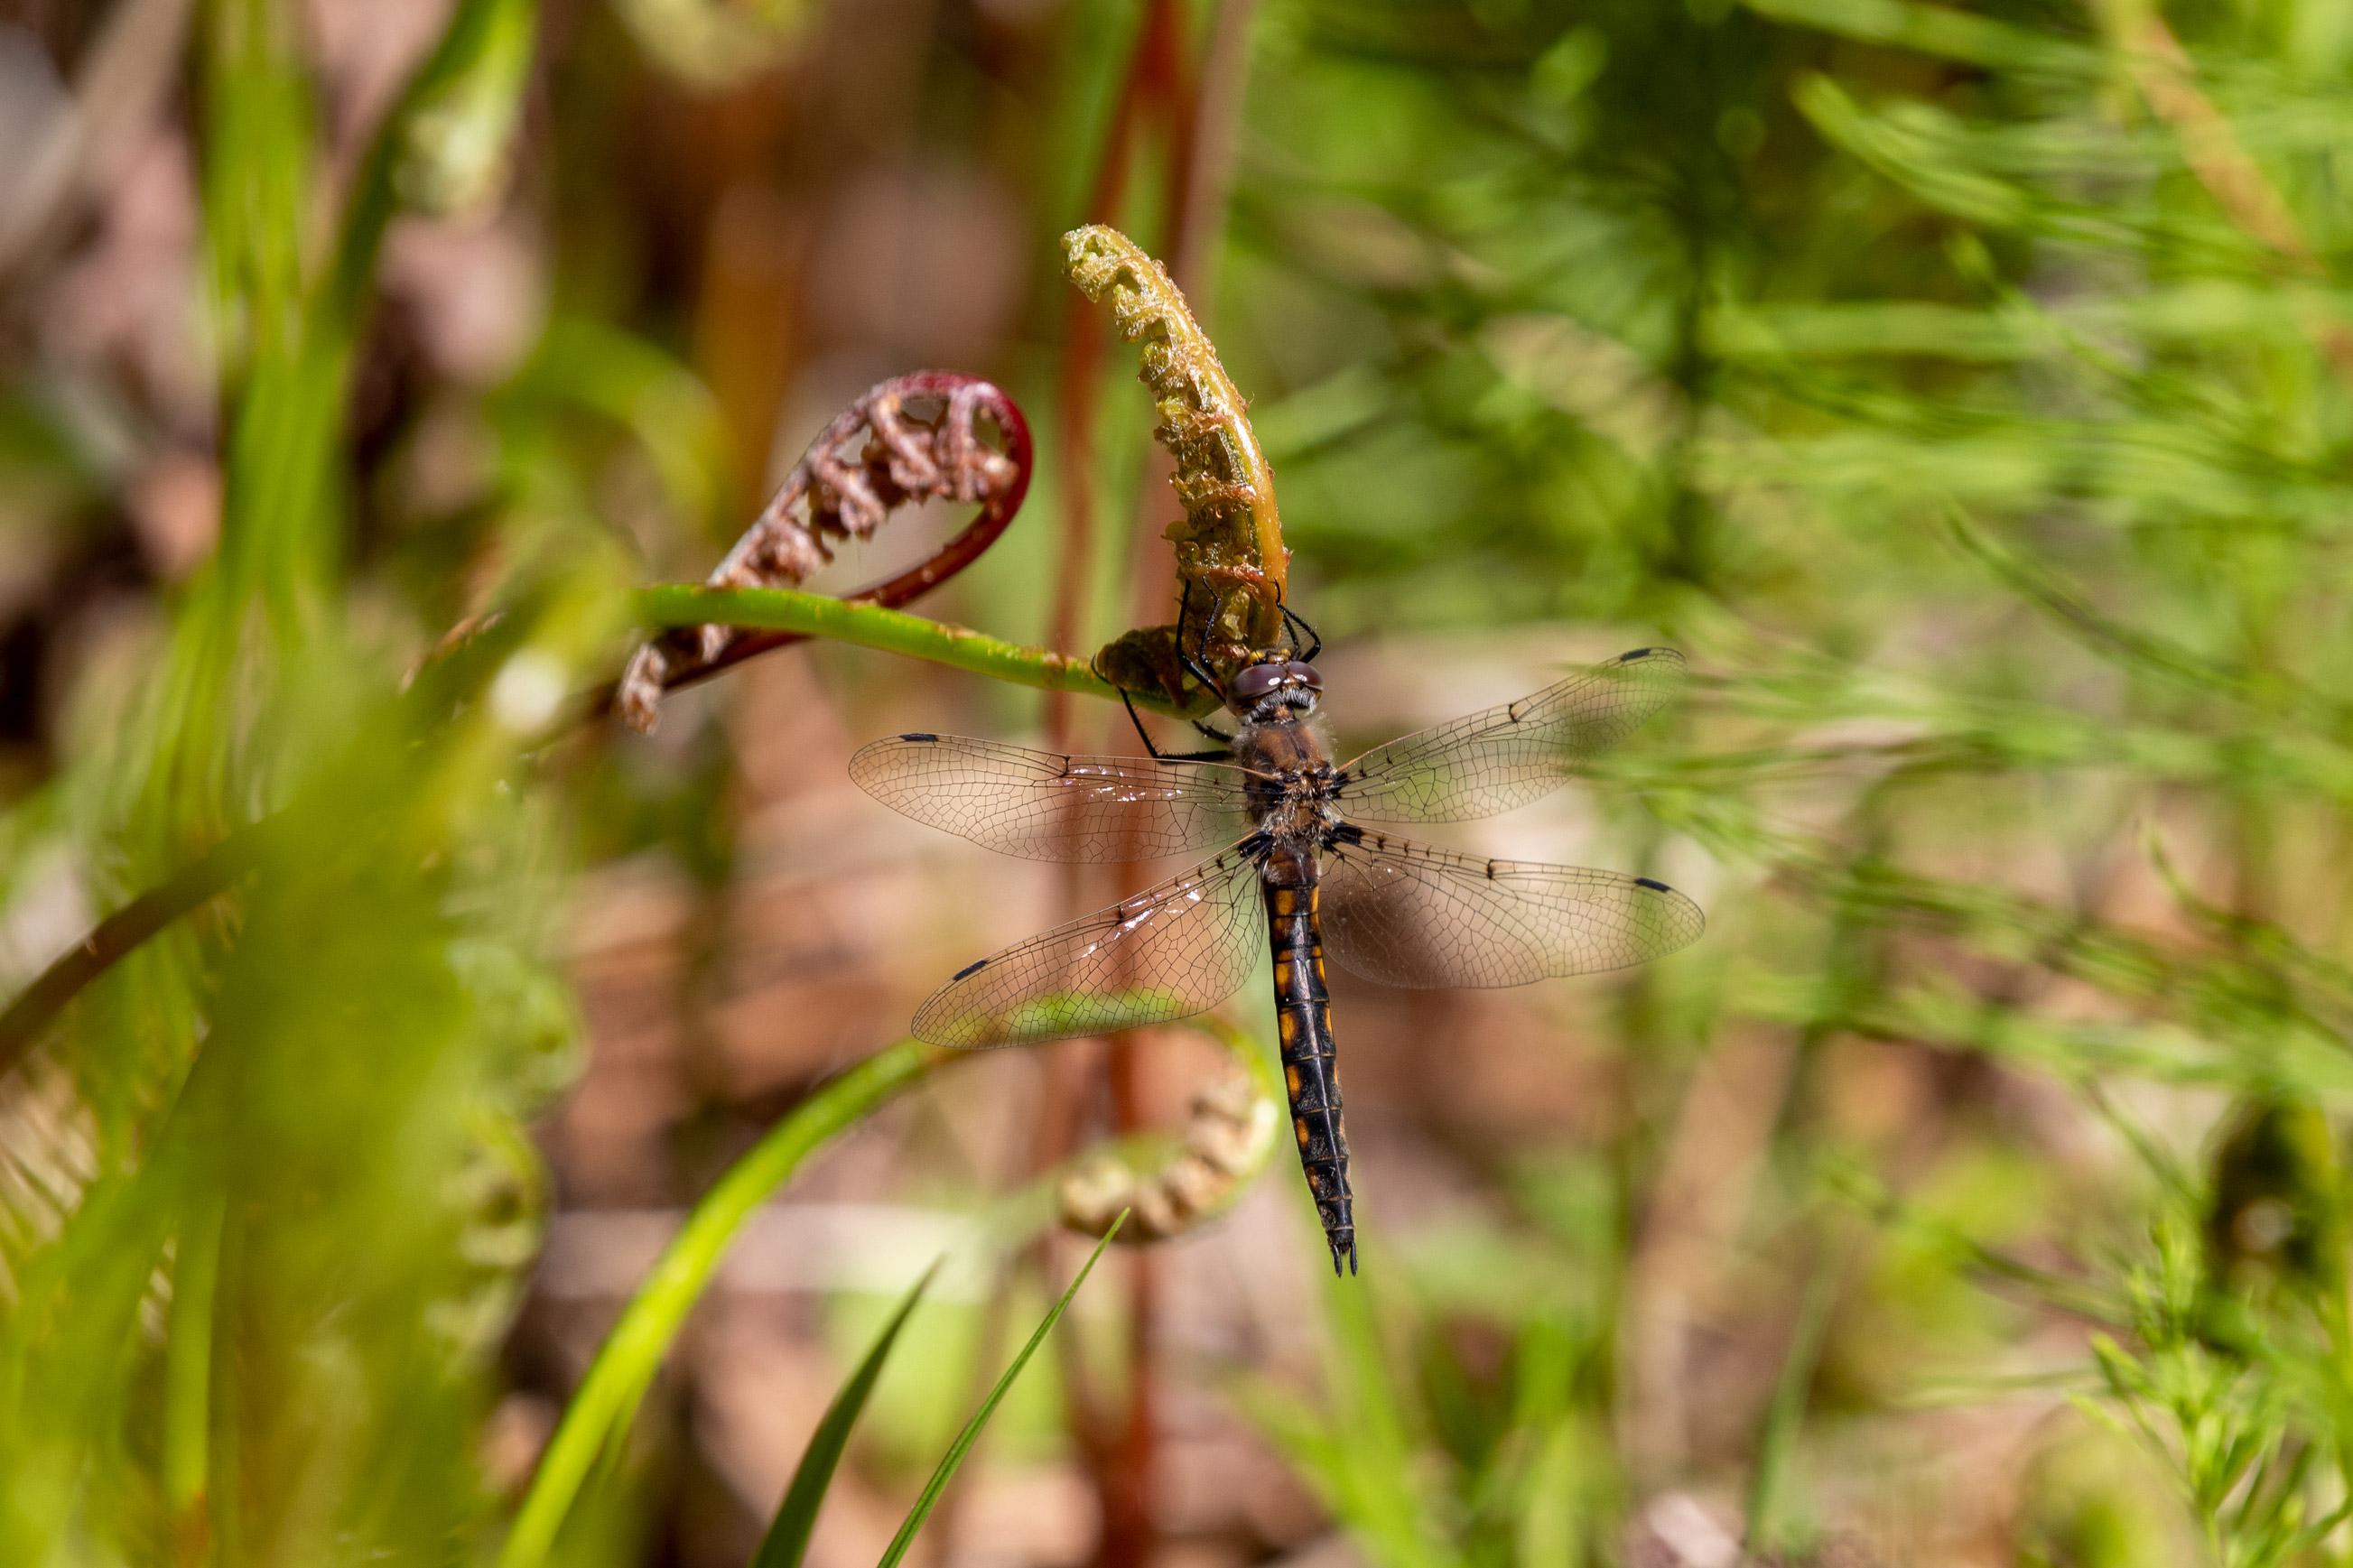 Dragonfly with transparent wings on full display resting on a plant